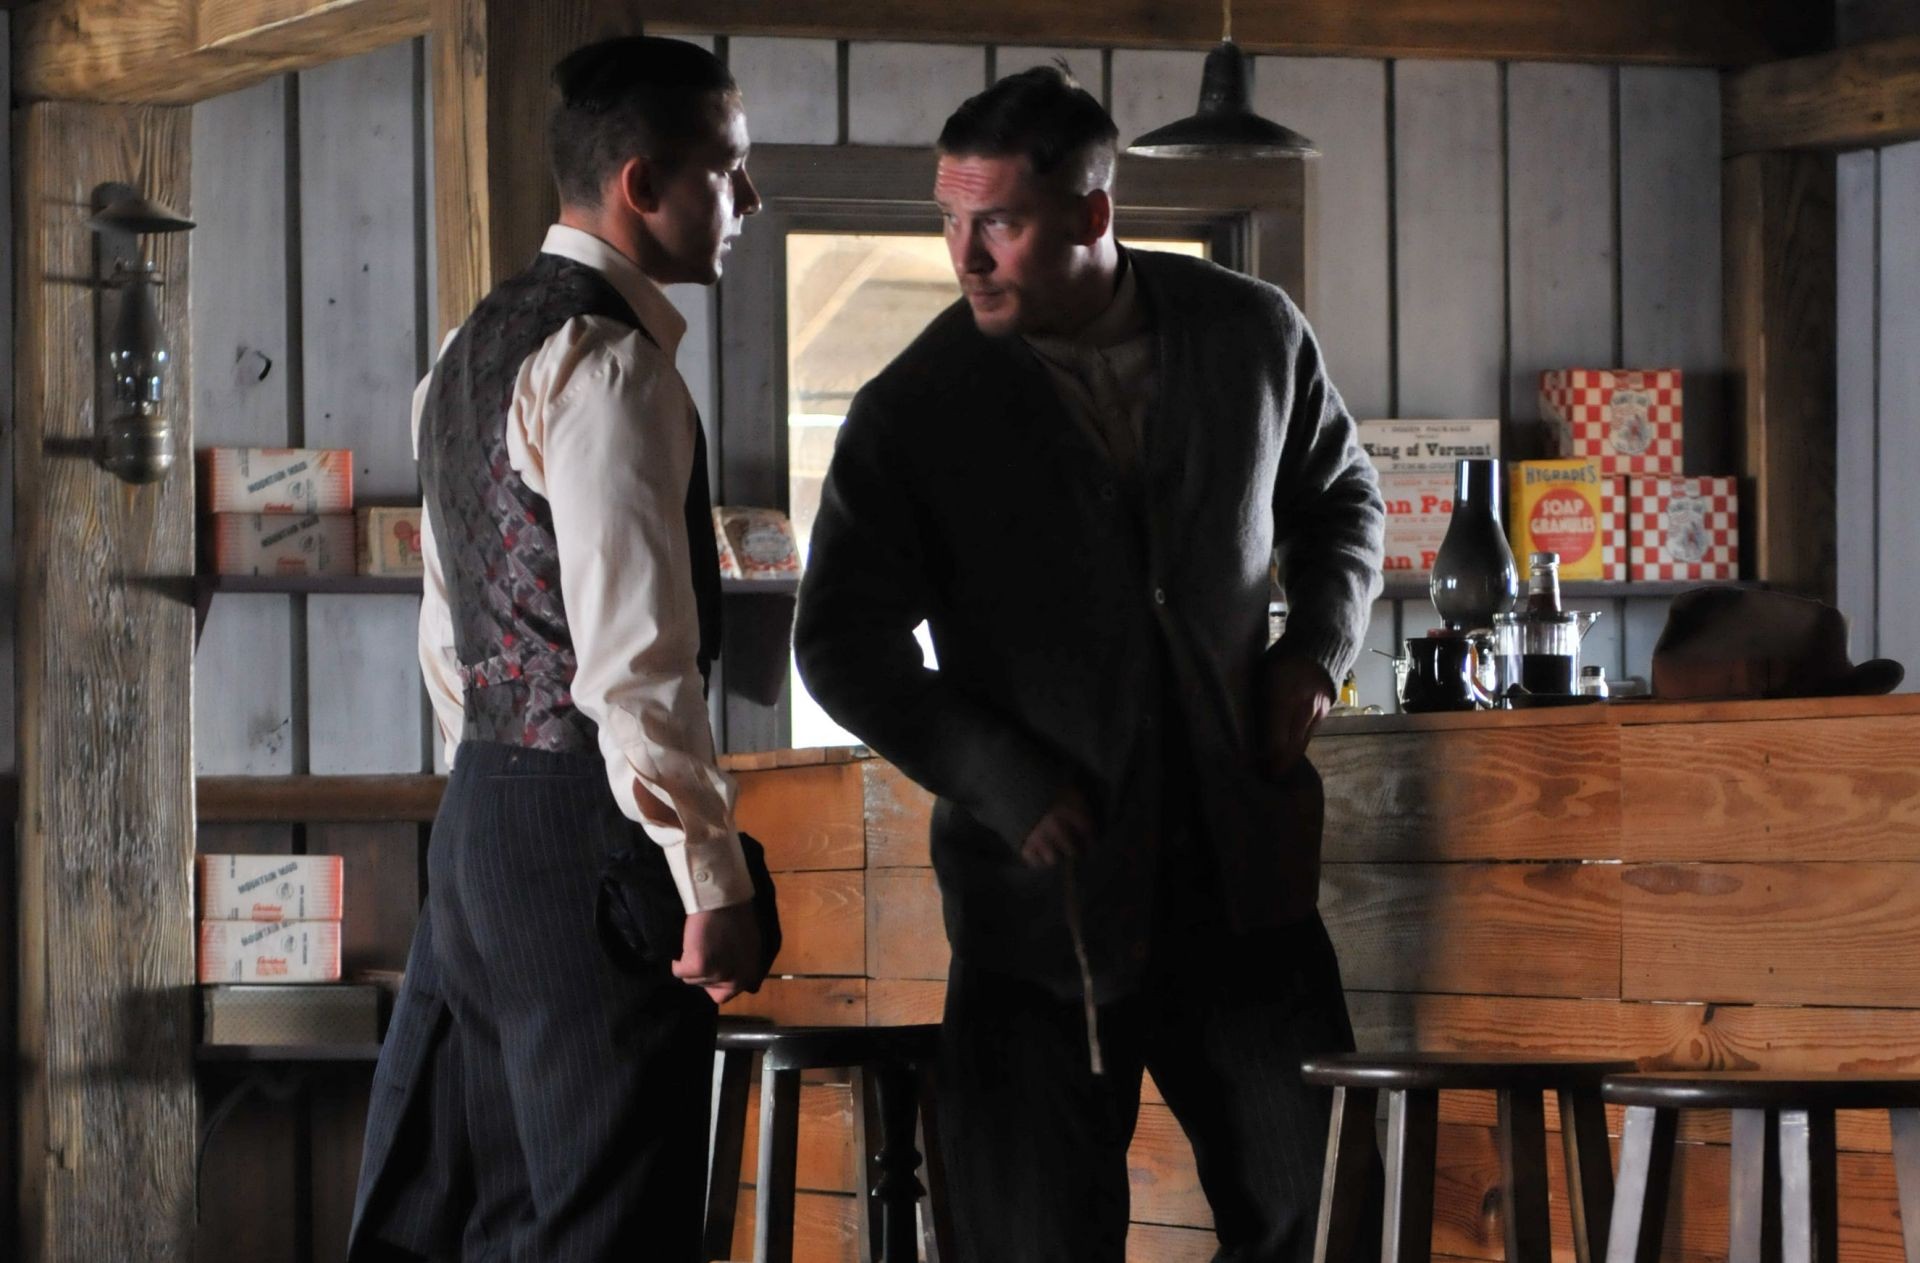 Shia LaBeouf stars as Jack Bondurant and Tom Hardy stars as Forrest Bondurant in The Weinstein Company's Lawless (2012). Photo credit by Richard Foreman.